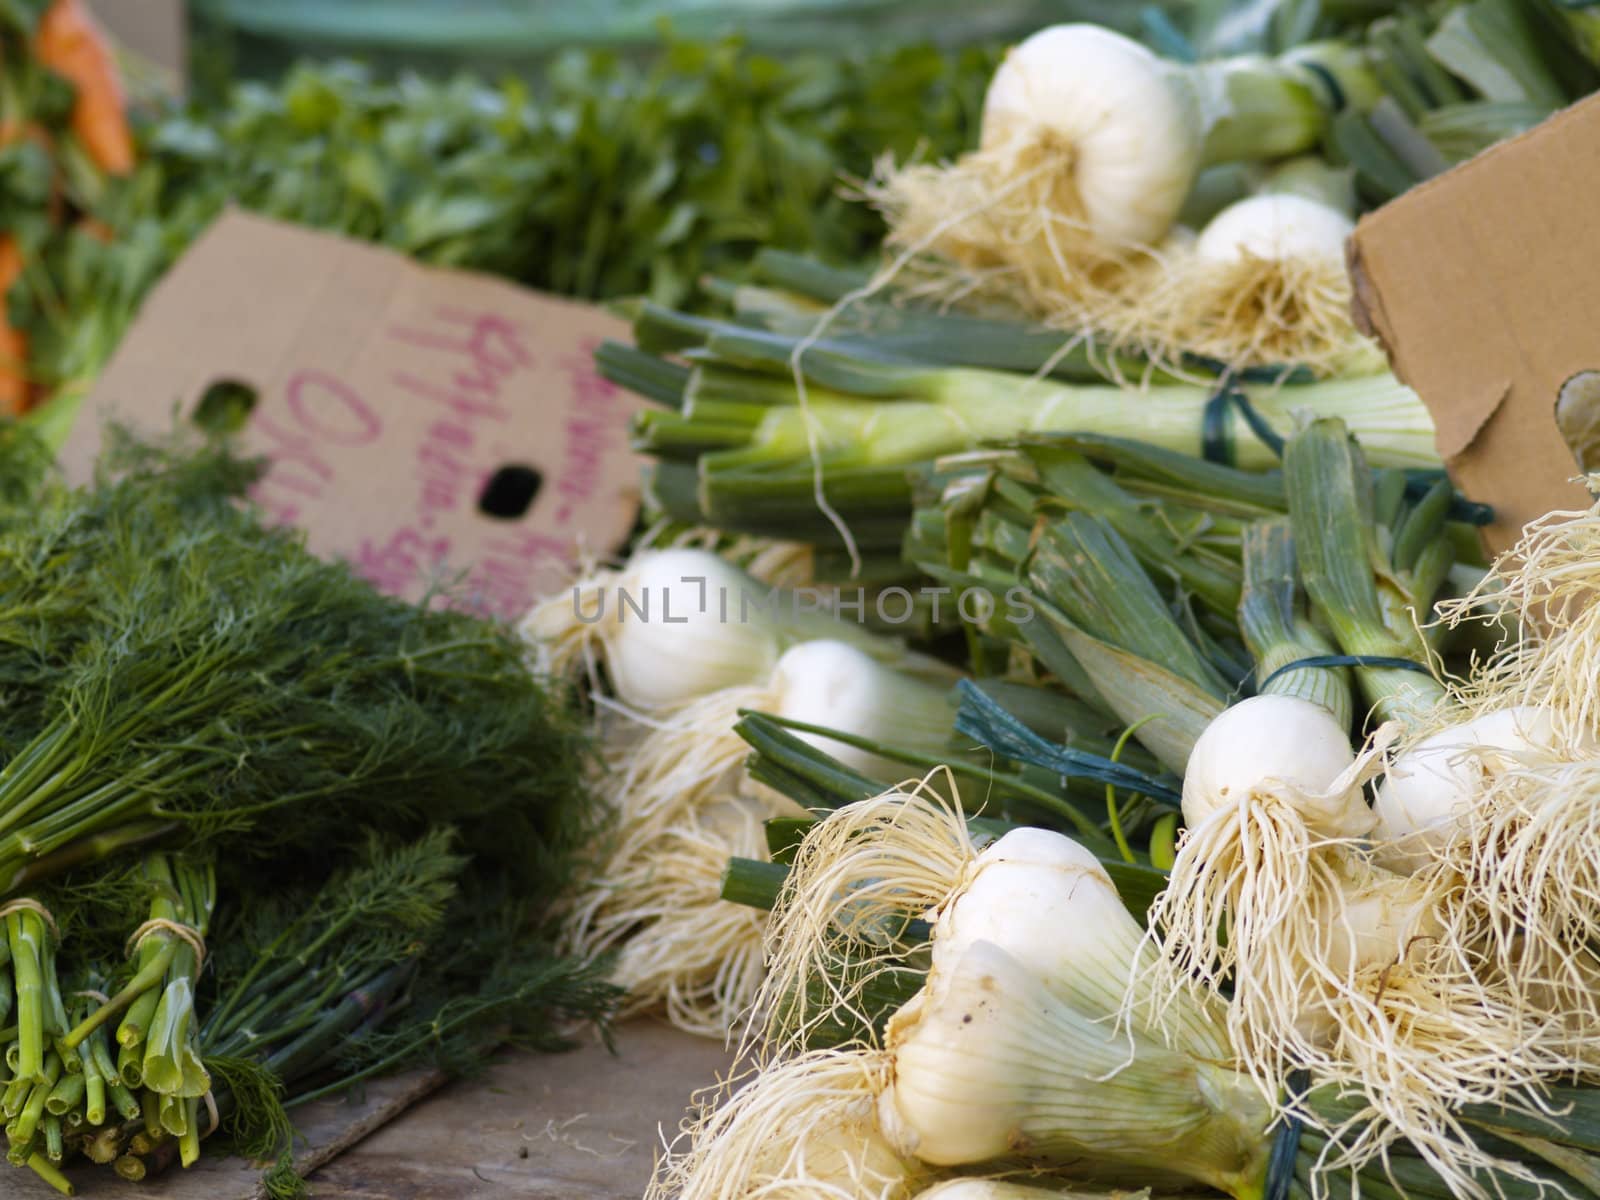 leek and fresh spices on greek market stall